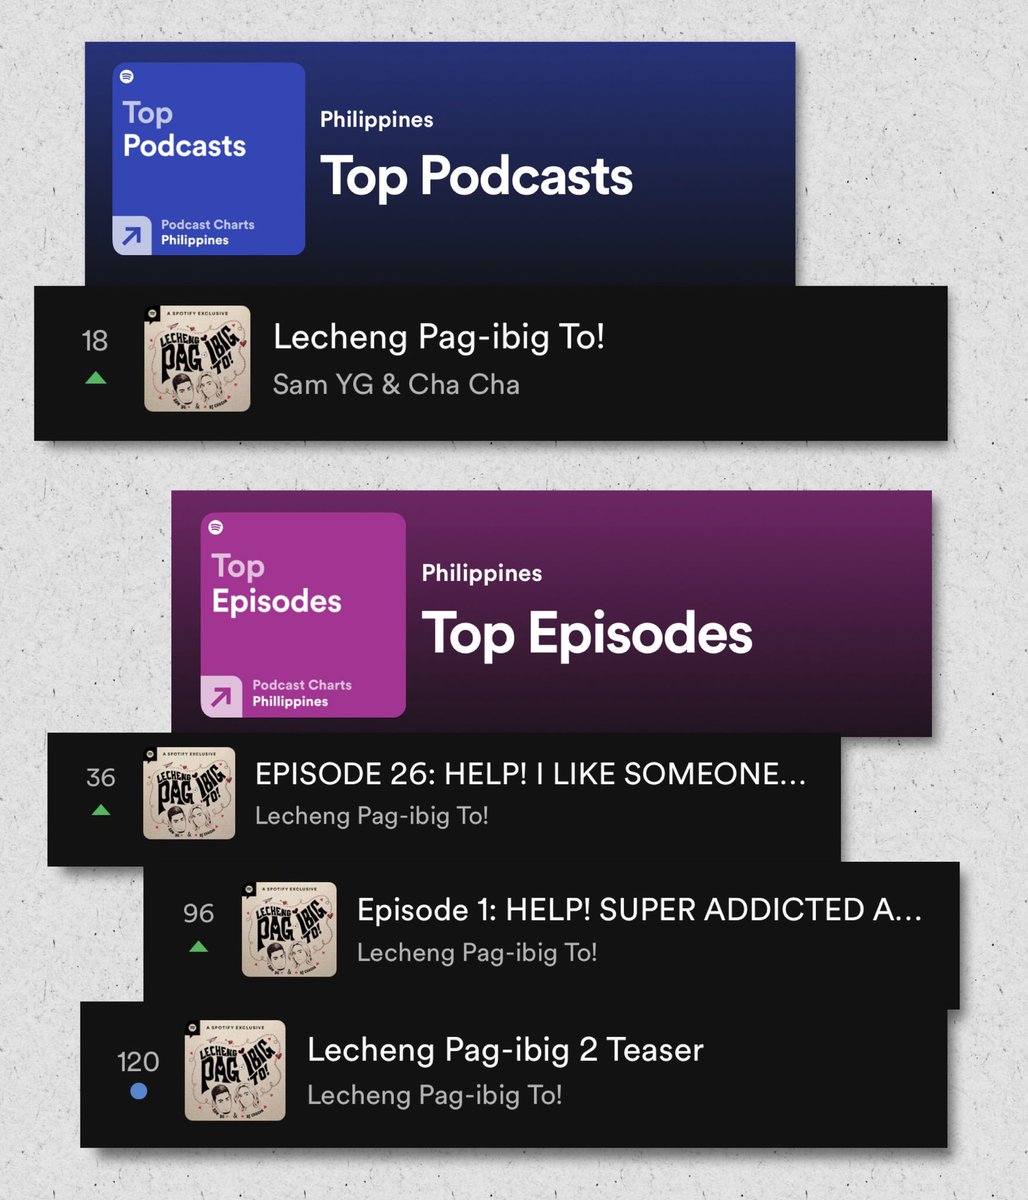 Thank you, Lechenatics! Fresh new episodes of #LechengPagibigTo with @sam_yg every Thursday, 5pm. Exclusive on @Spotify! Download now, it’s FREE! Listen to all our previous episodes & don’t forget to follow us there 💜